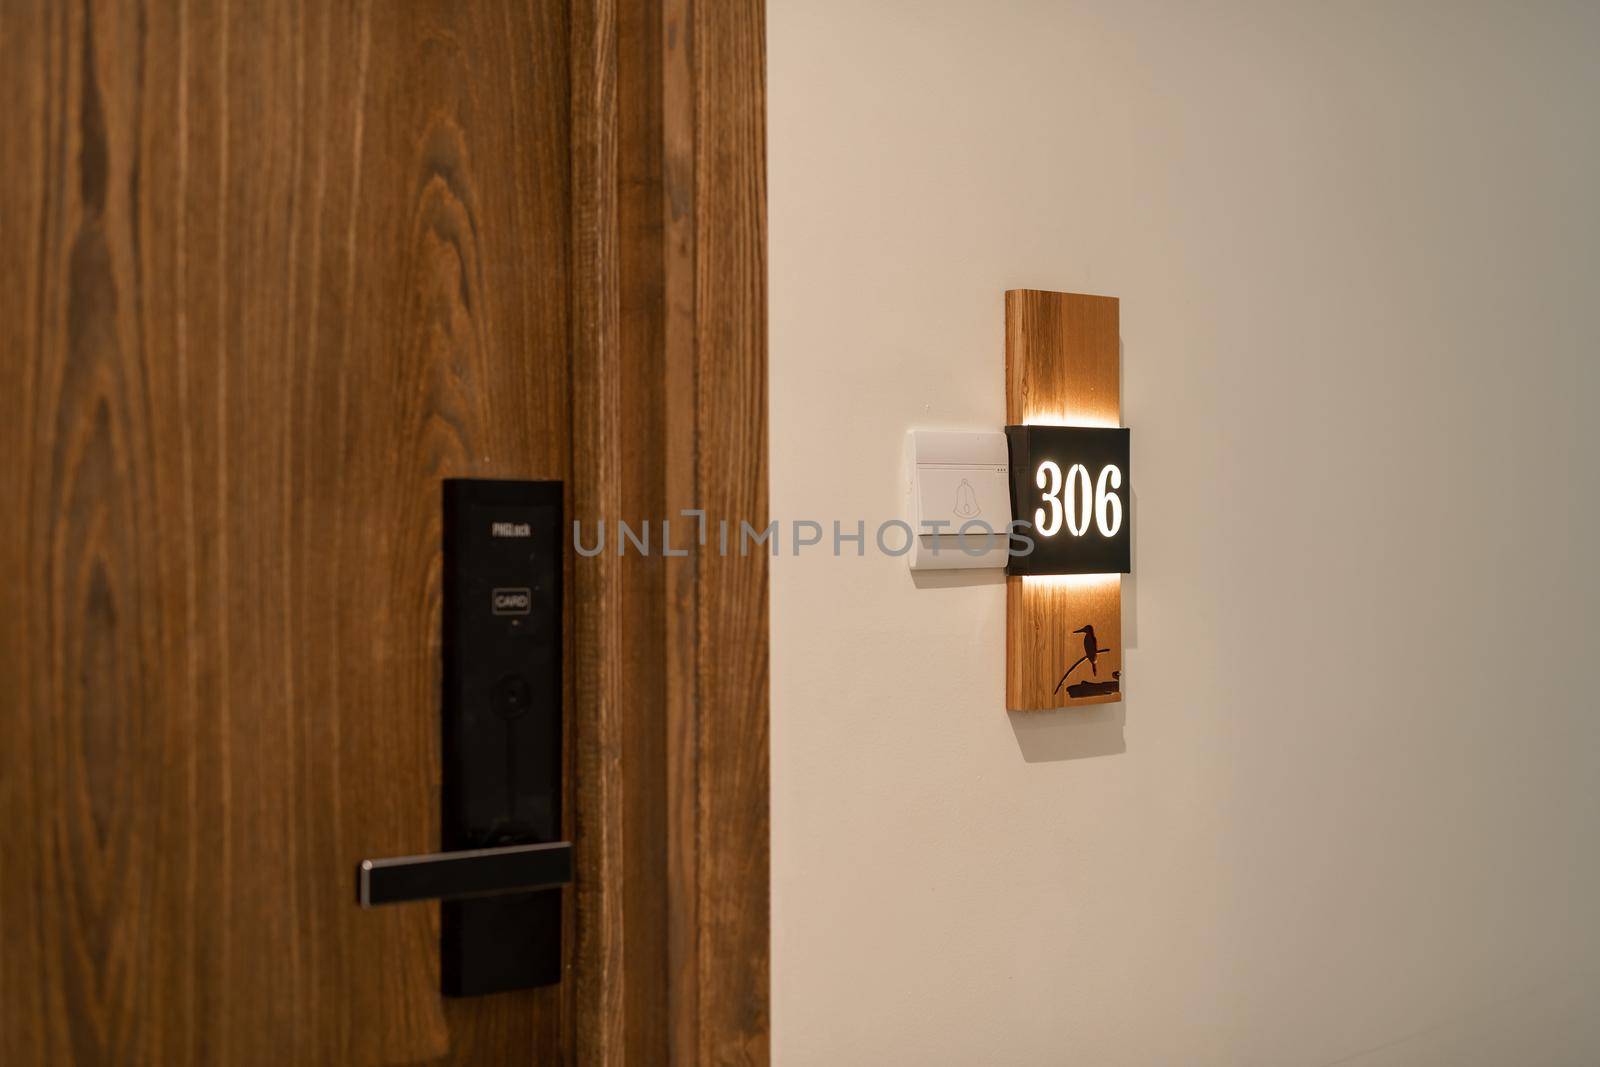 Hotel room number mounted on a wall